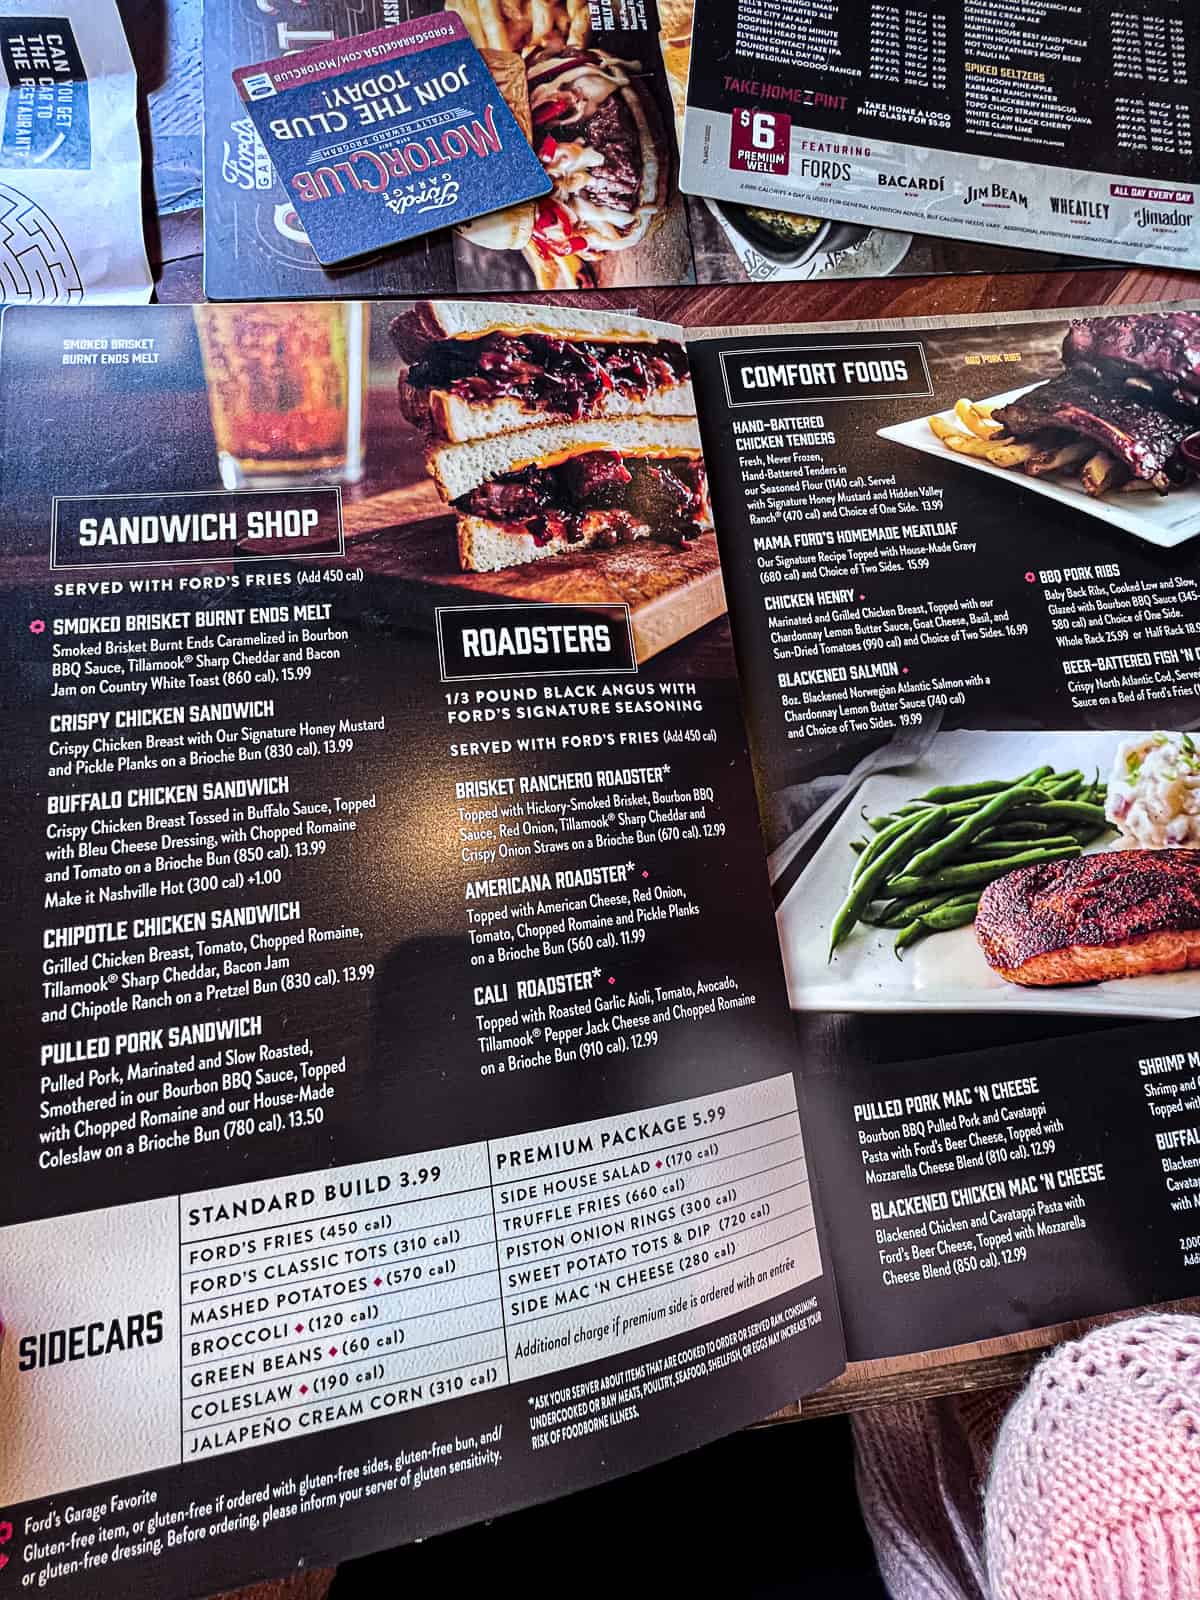 Fords Garage Menu for lunch and dinner at the Plano Texas restaurant location